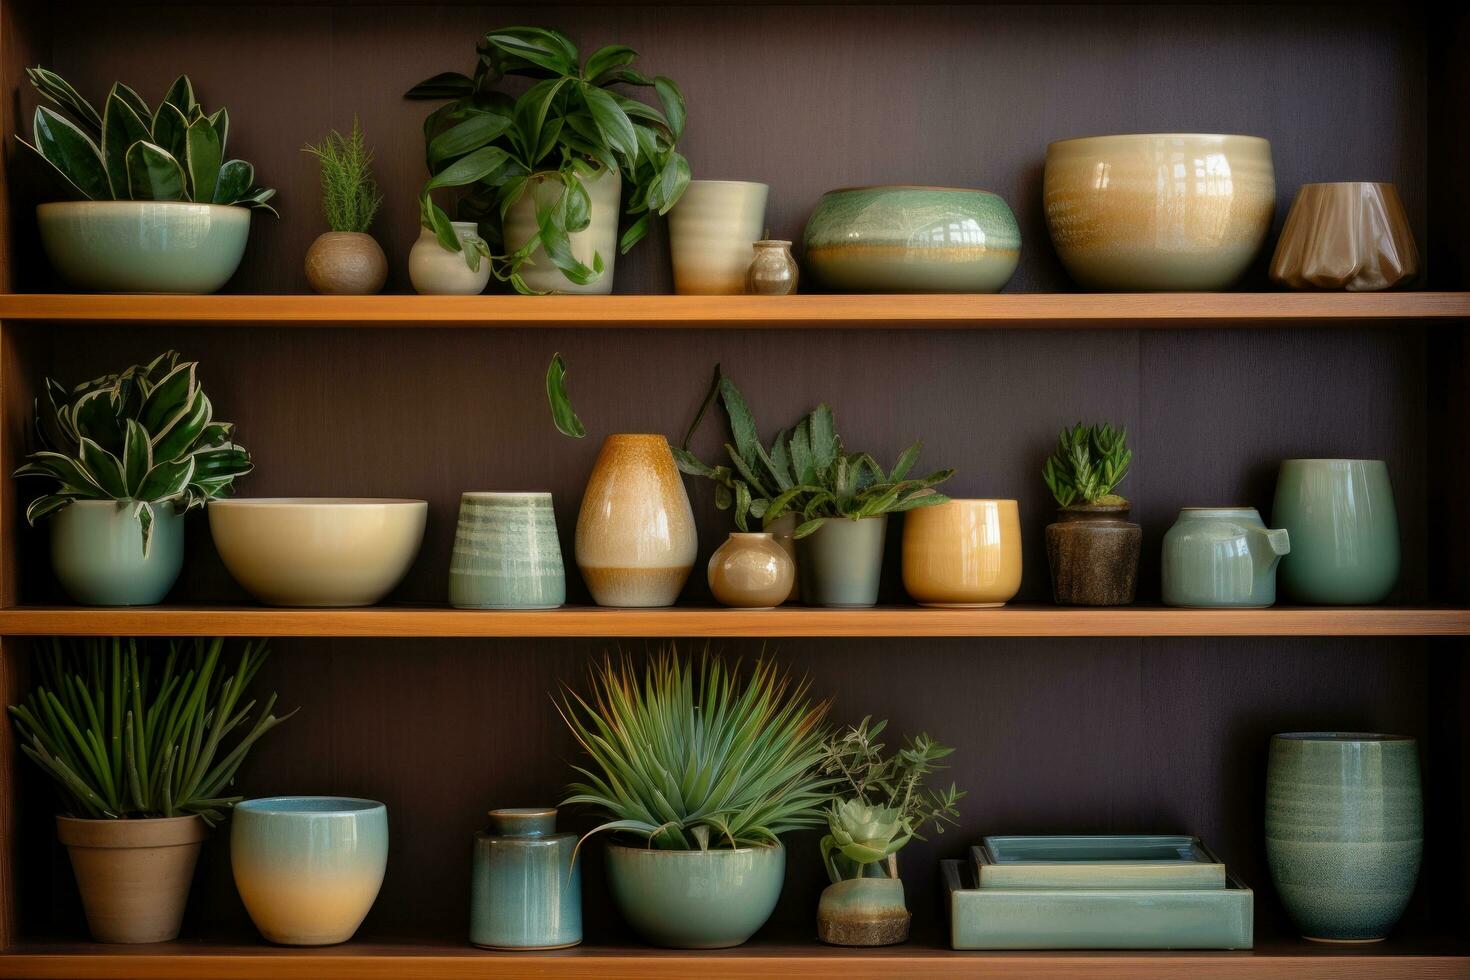 Shelf with different pods and plants photo